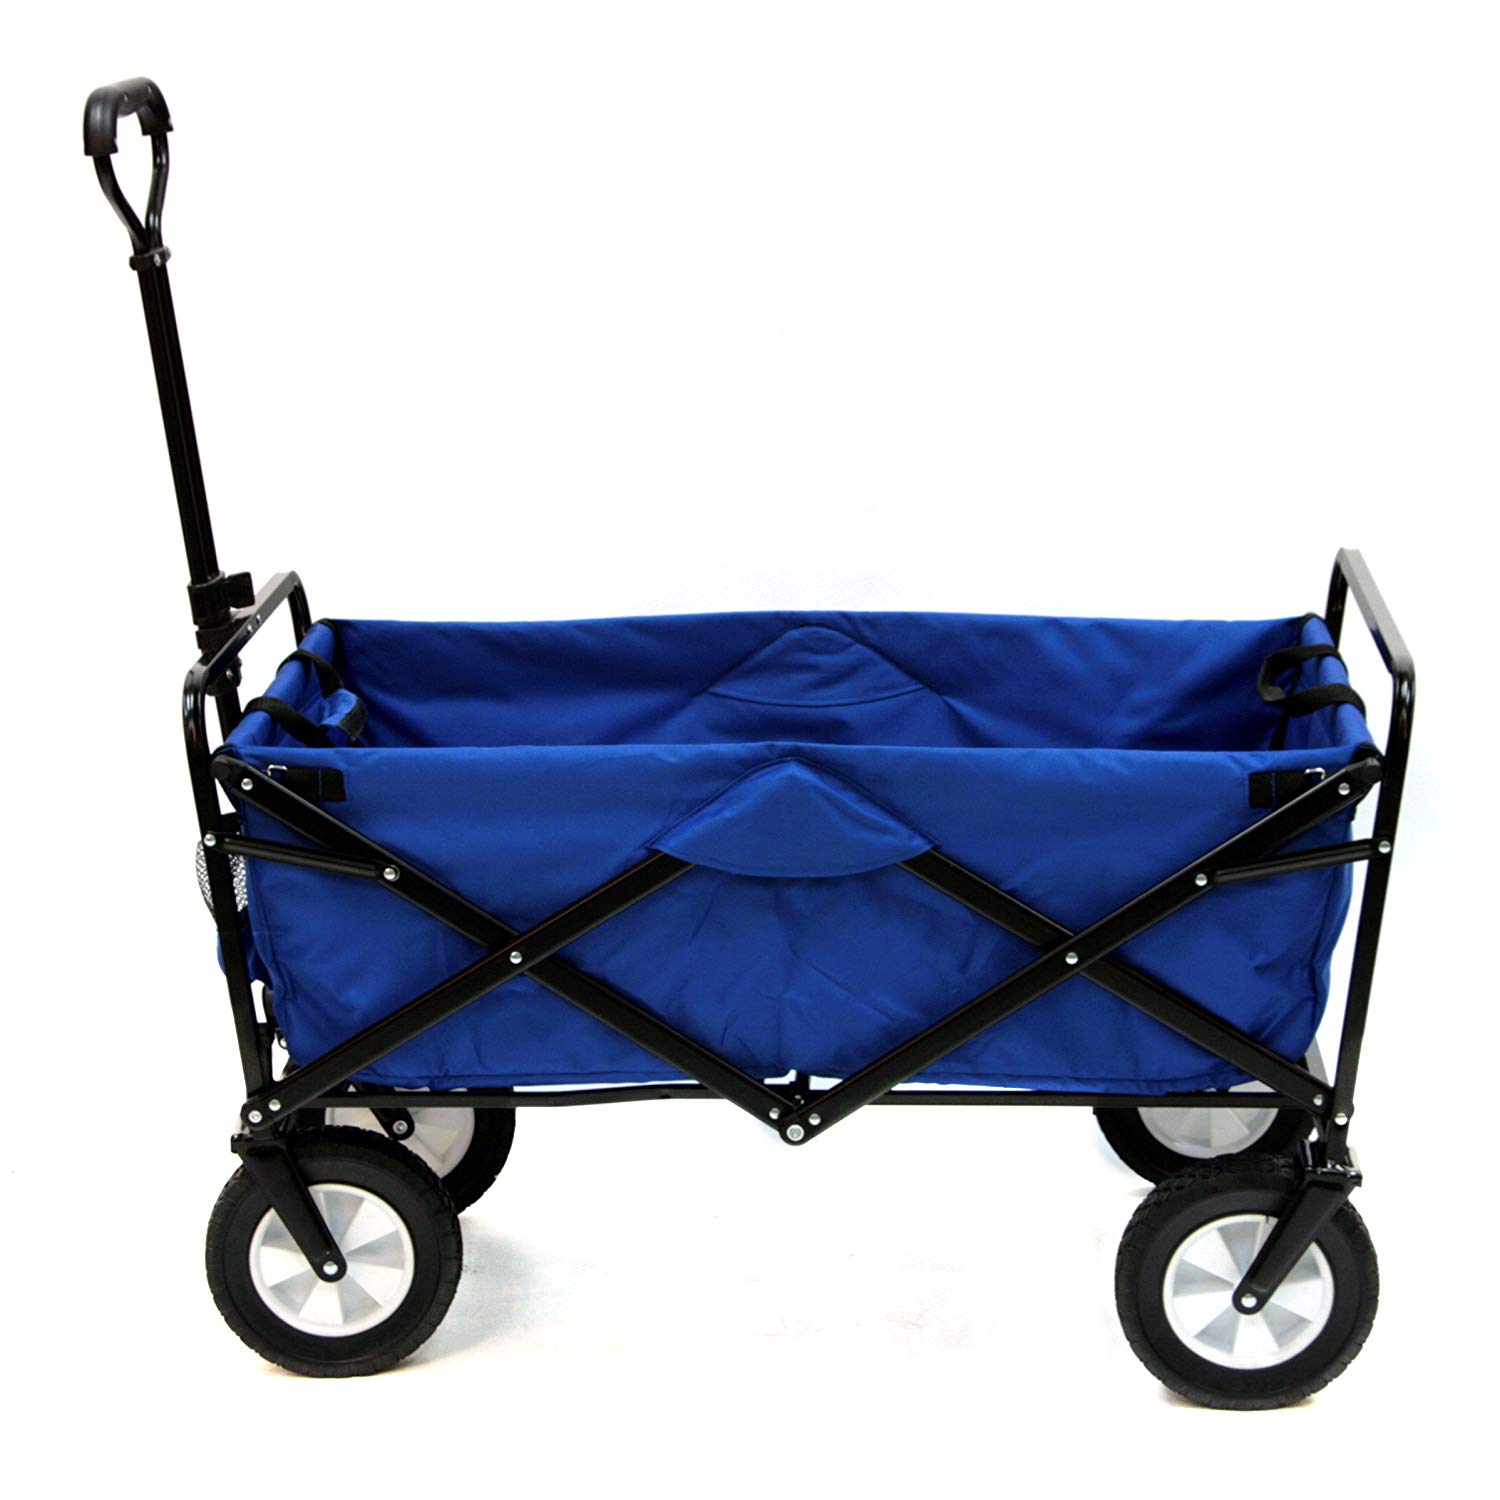 Mac Sports Collapsible Folding Outdoor Utility Wagon, Blue - Collapsible Wagons